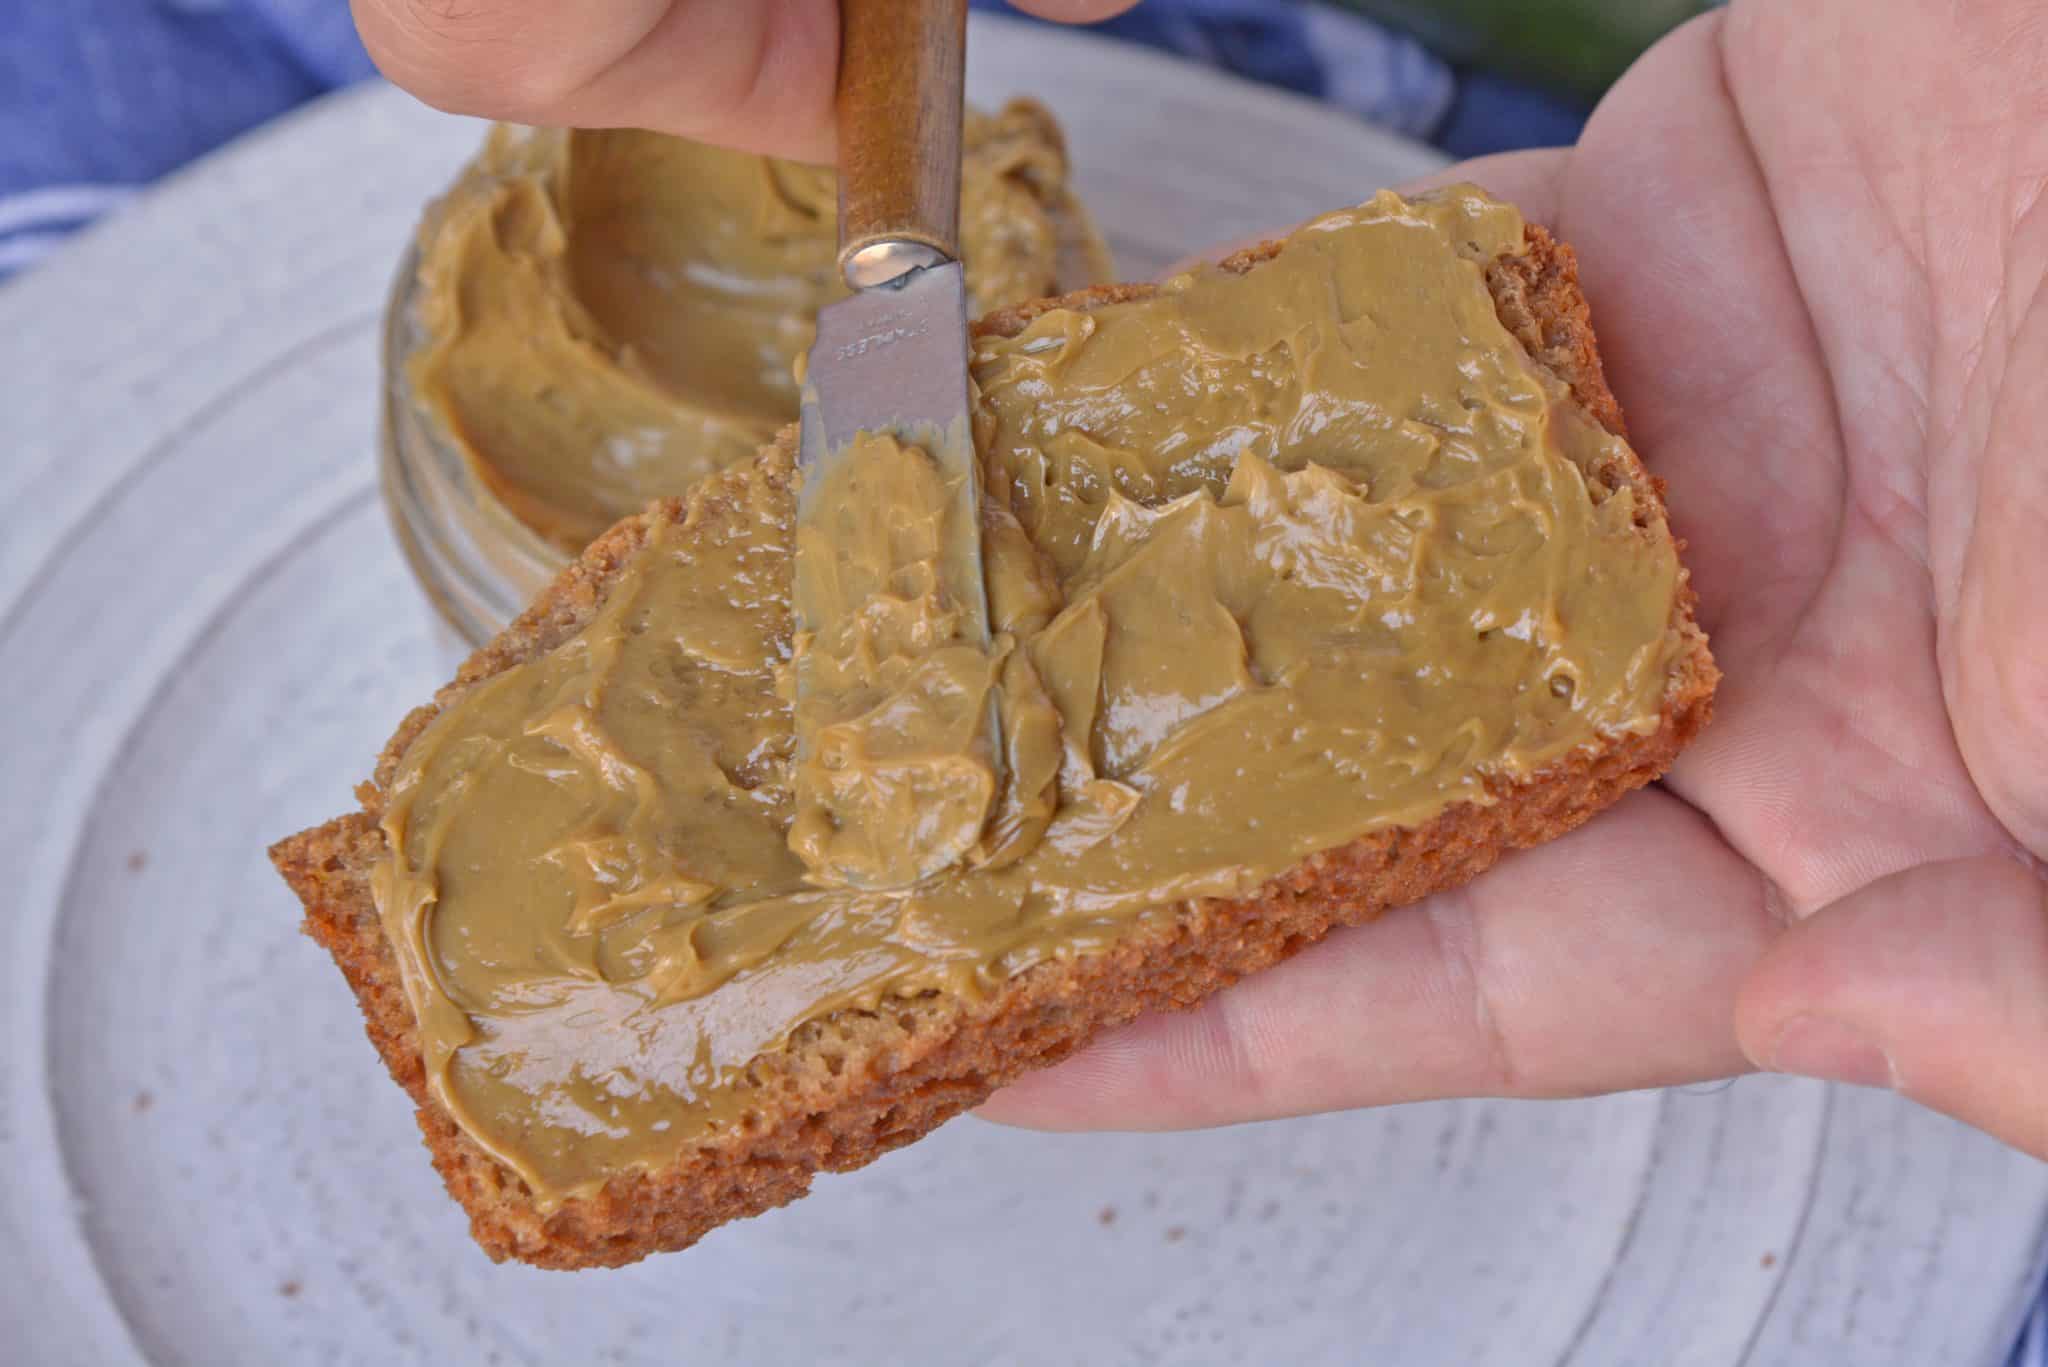 Molasses Butter is the blend of butter, molasses and one secret ingredient that will never guess until see the recipe! Served best on fresh zucchini bread and biscuits! #flavoredbutter #molassesbutter www.savoryexperiments.com